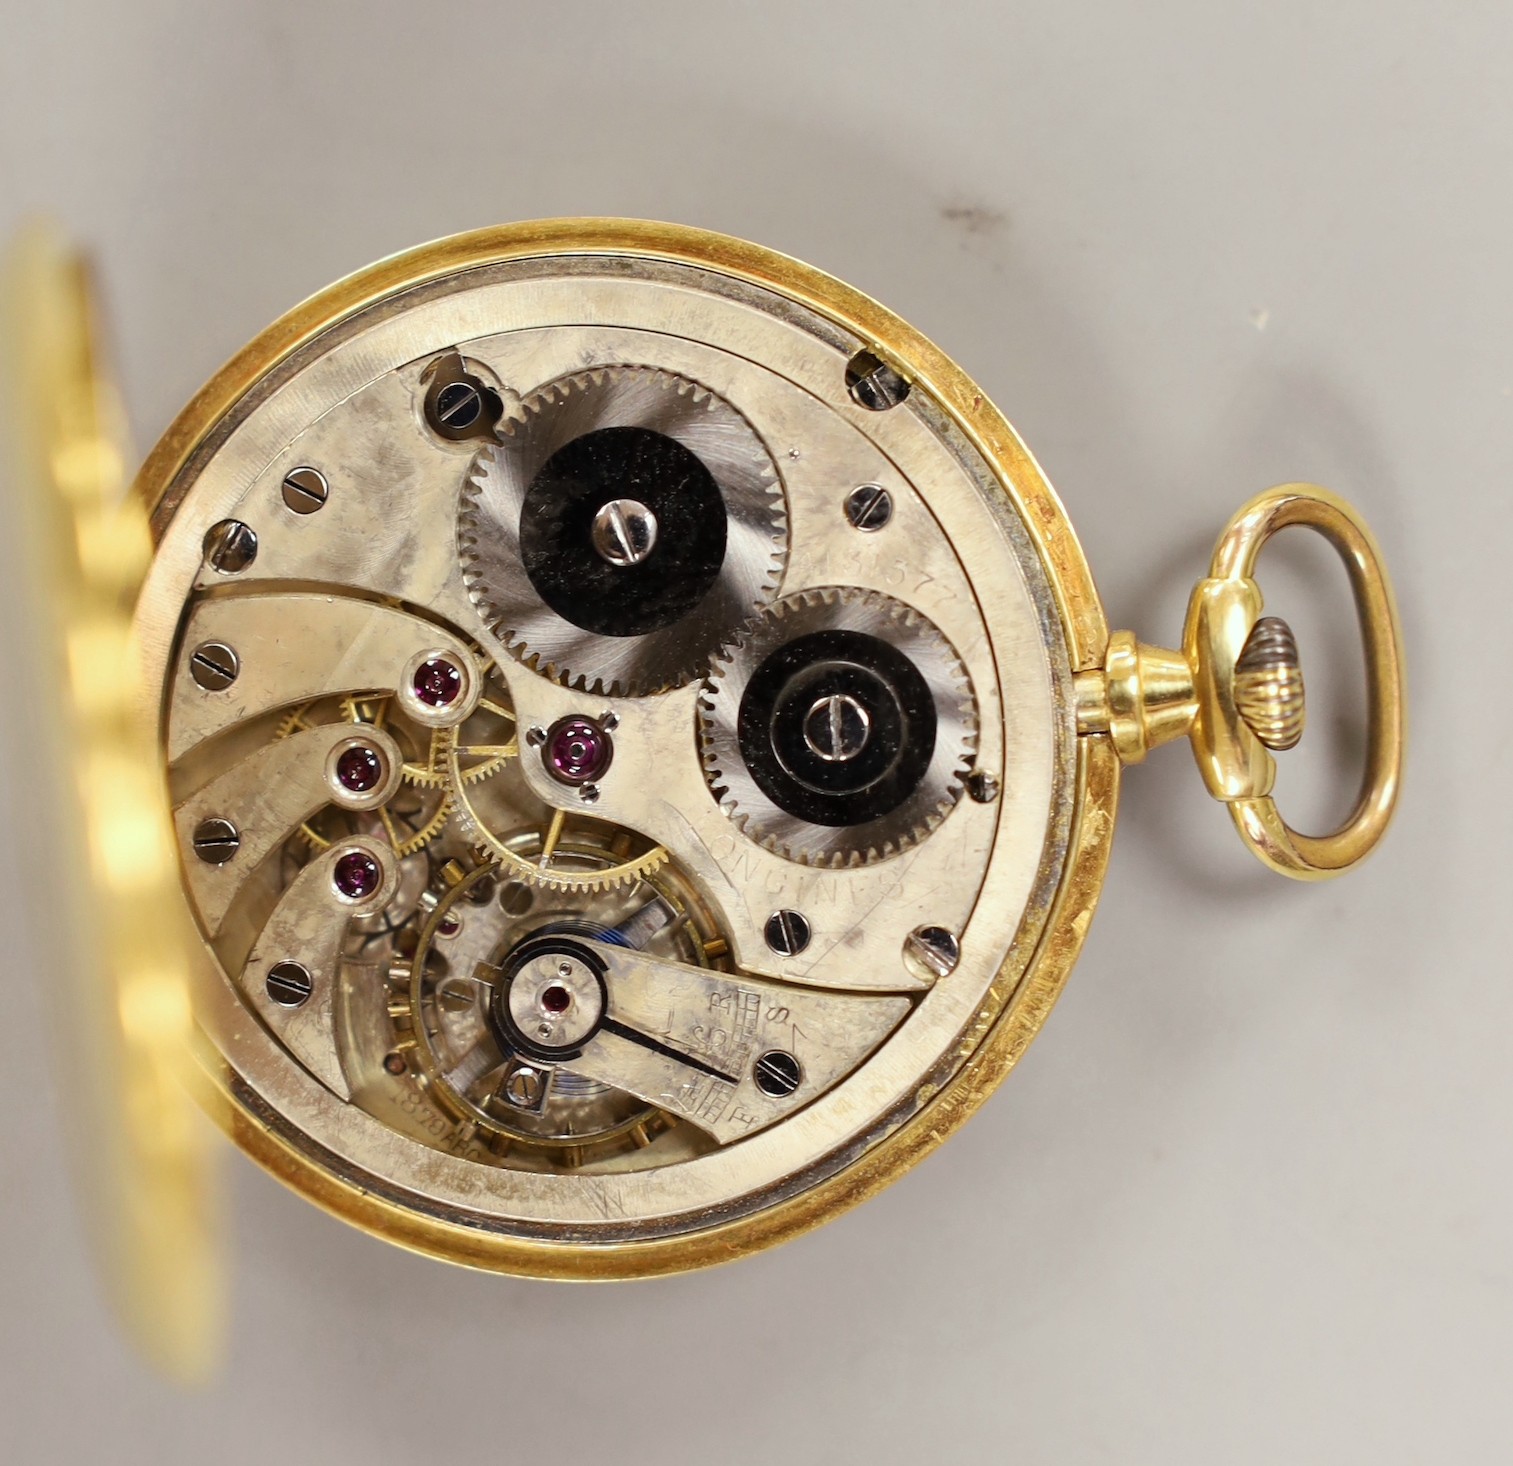 An 18k Longines open face keyless dress pocket watch, with Arabic dial and subsidiary seconds, case diameter 47mm, gross weight 56.5 grams.